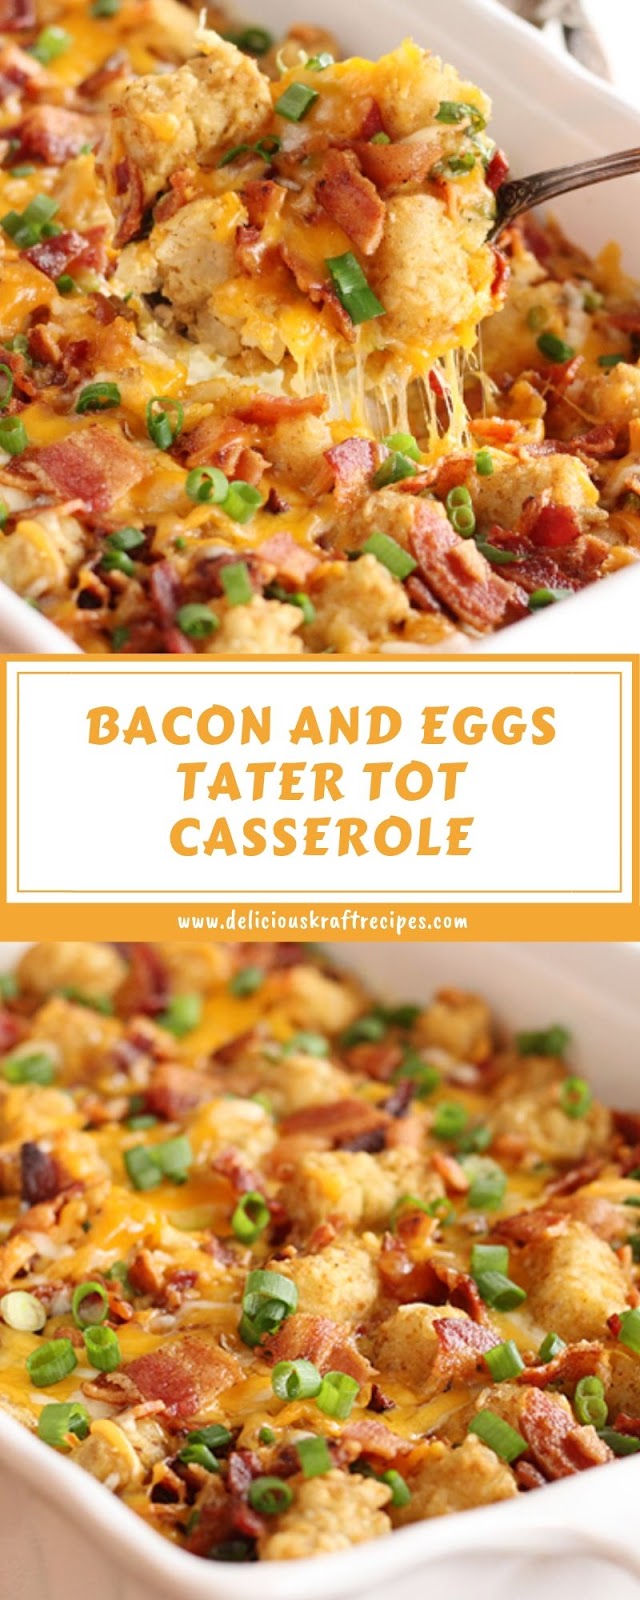 BACON AND EGGS TATER TOT CASSEROLE